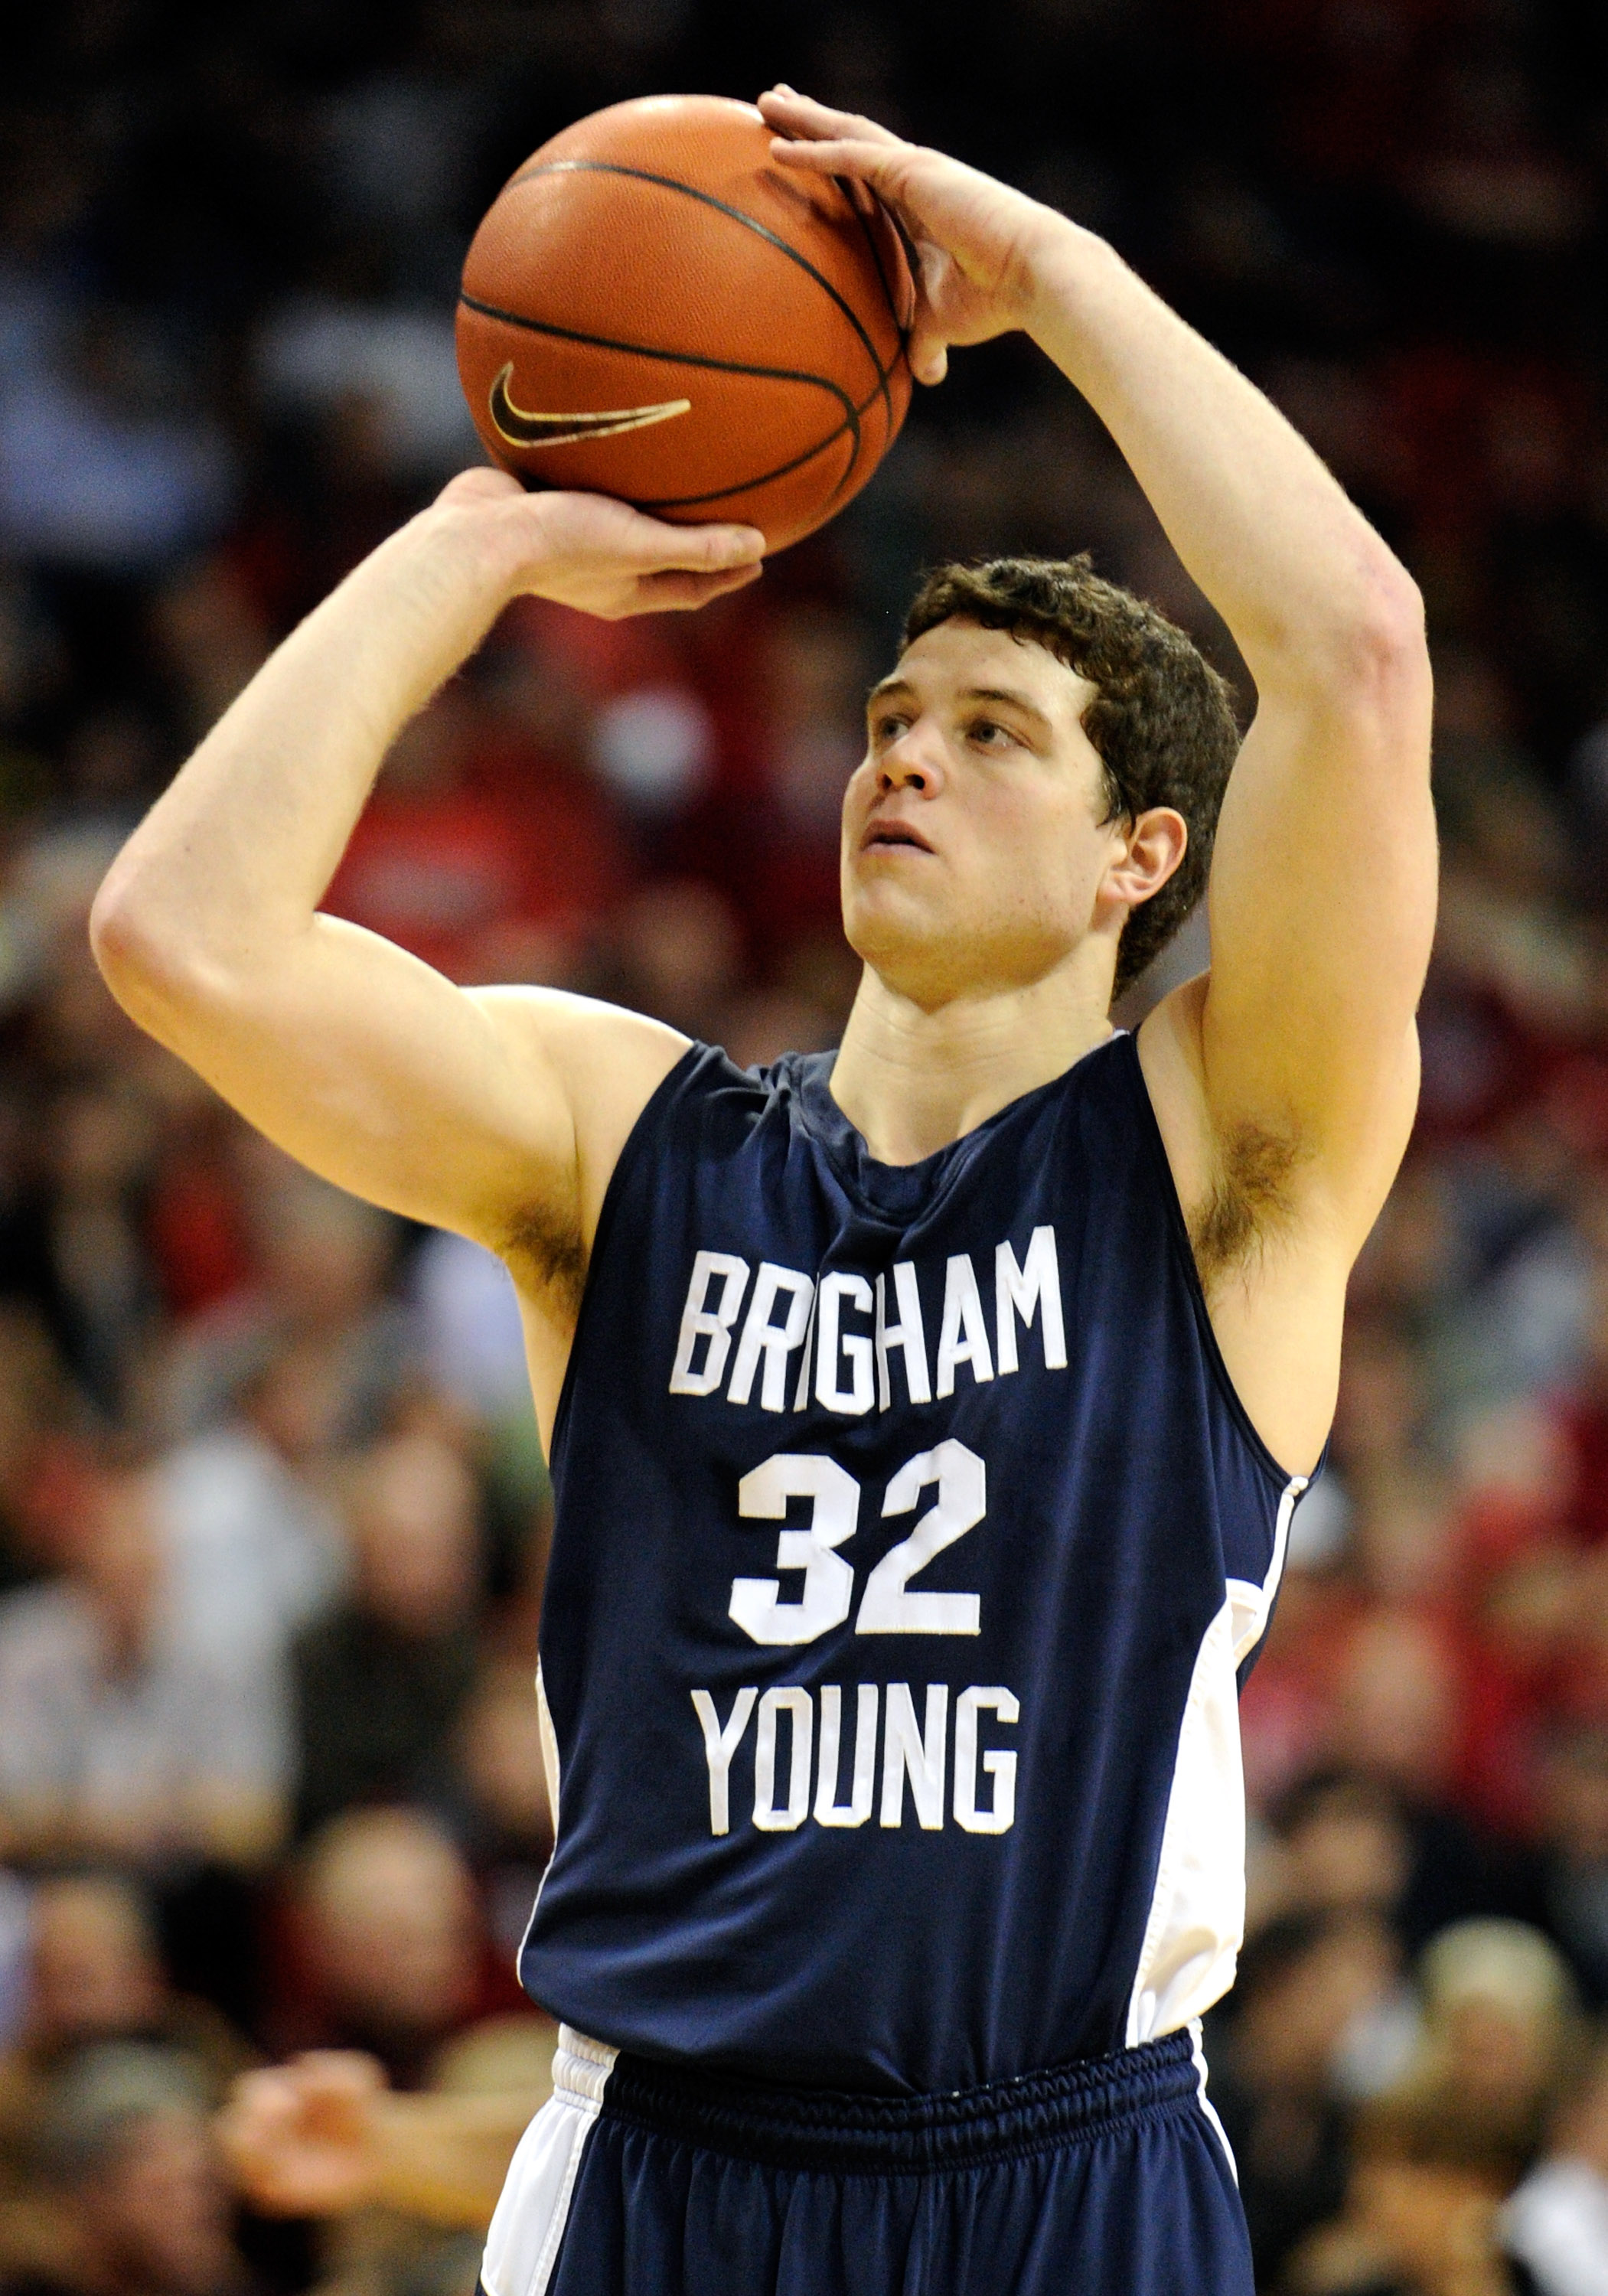 LAS VEGAS, NV - JANUARY 05:  Jimmer Fredette #32 of the Brigham Young University Cougars shoots a technical free throw during a game against the UNLV Rebels at the Thomas & Mack Center January 5, 2011 in Las Vegas, Nevada. BYU won 89-77.  (Photo by Ethan